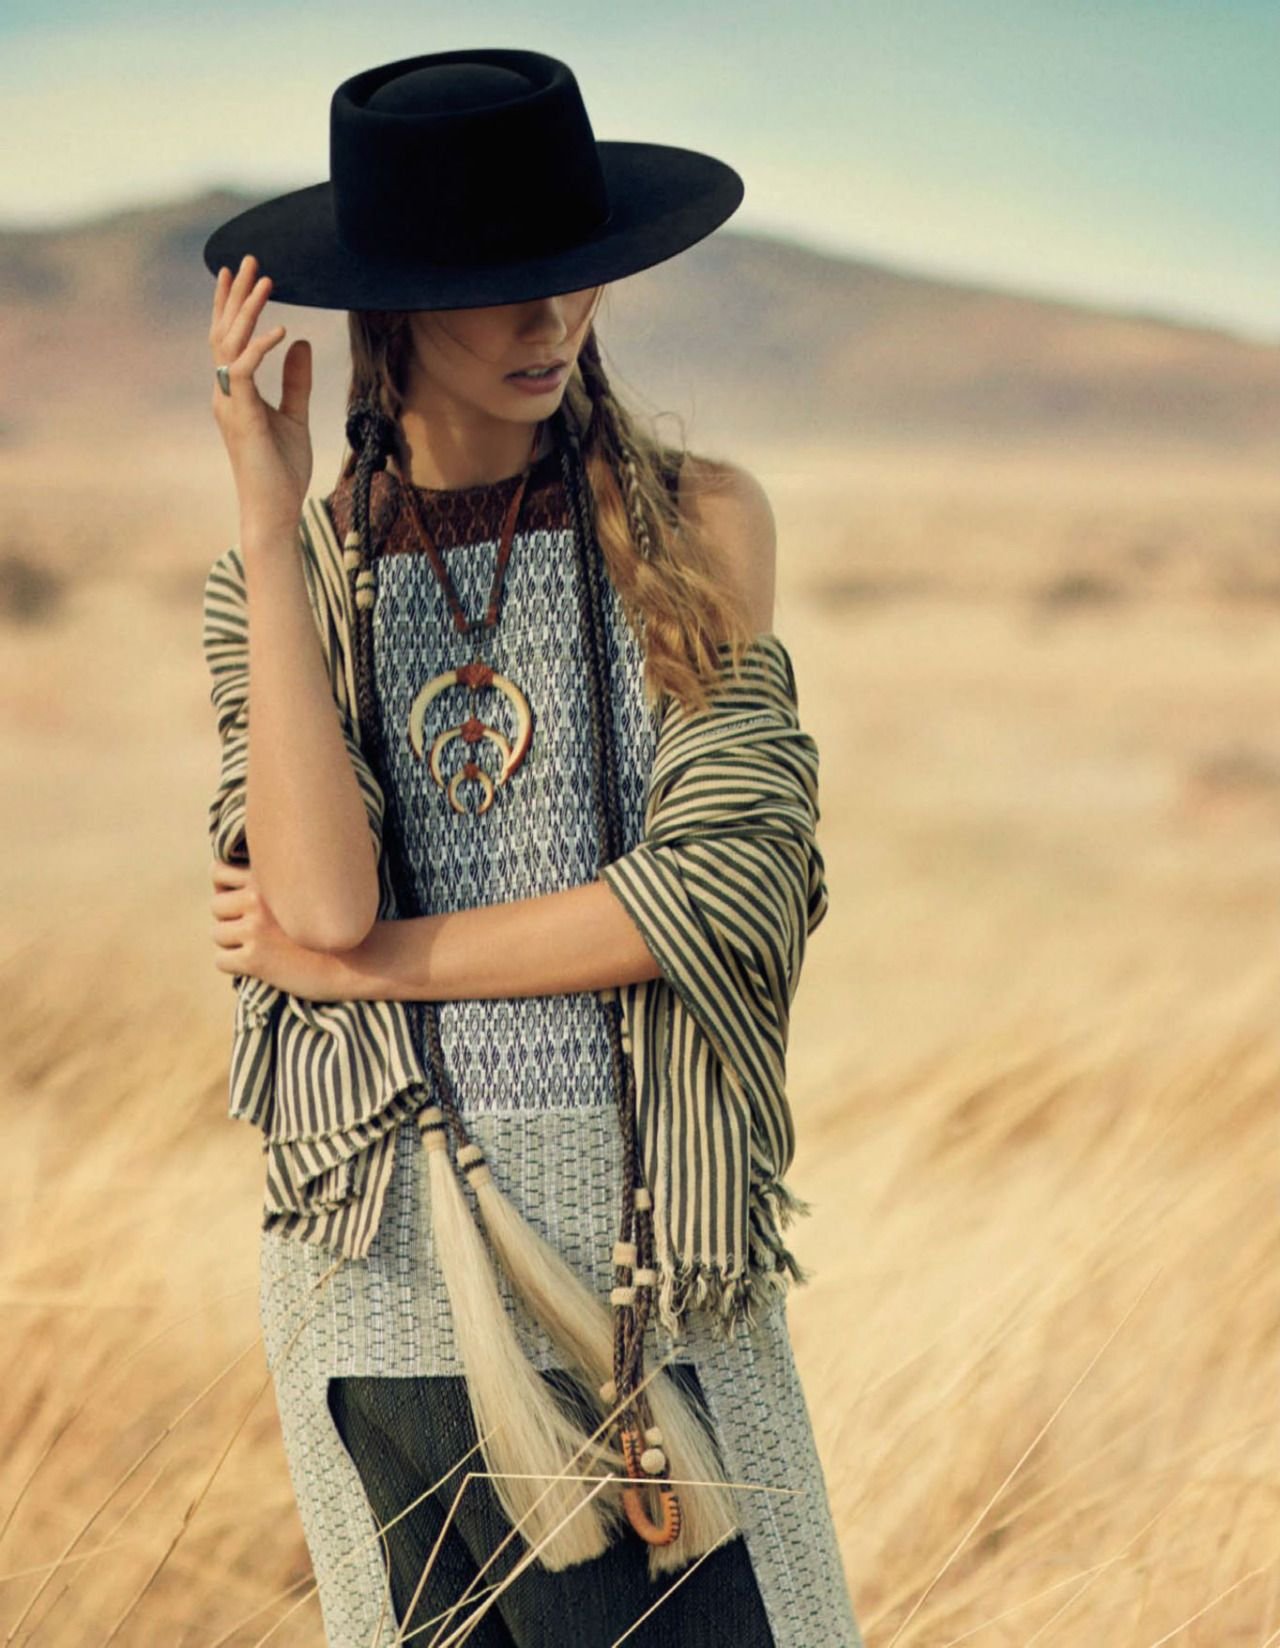 Boho style skirts » Wallpapers and Images